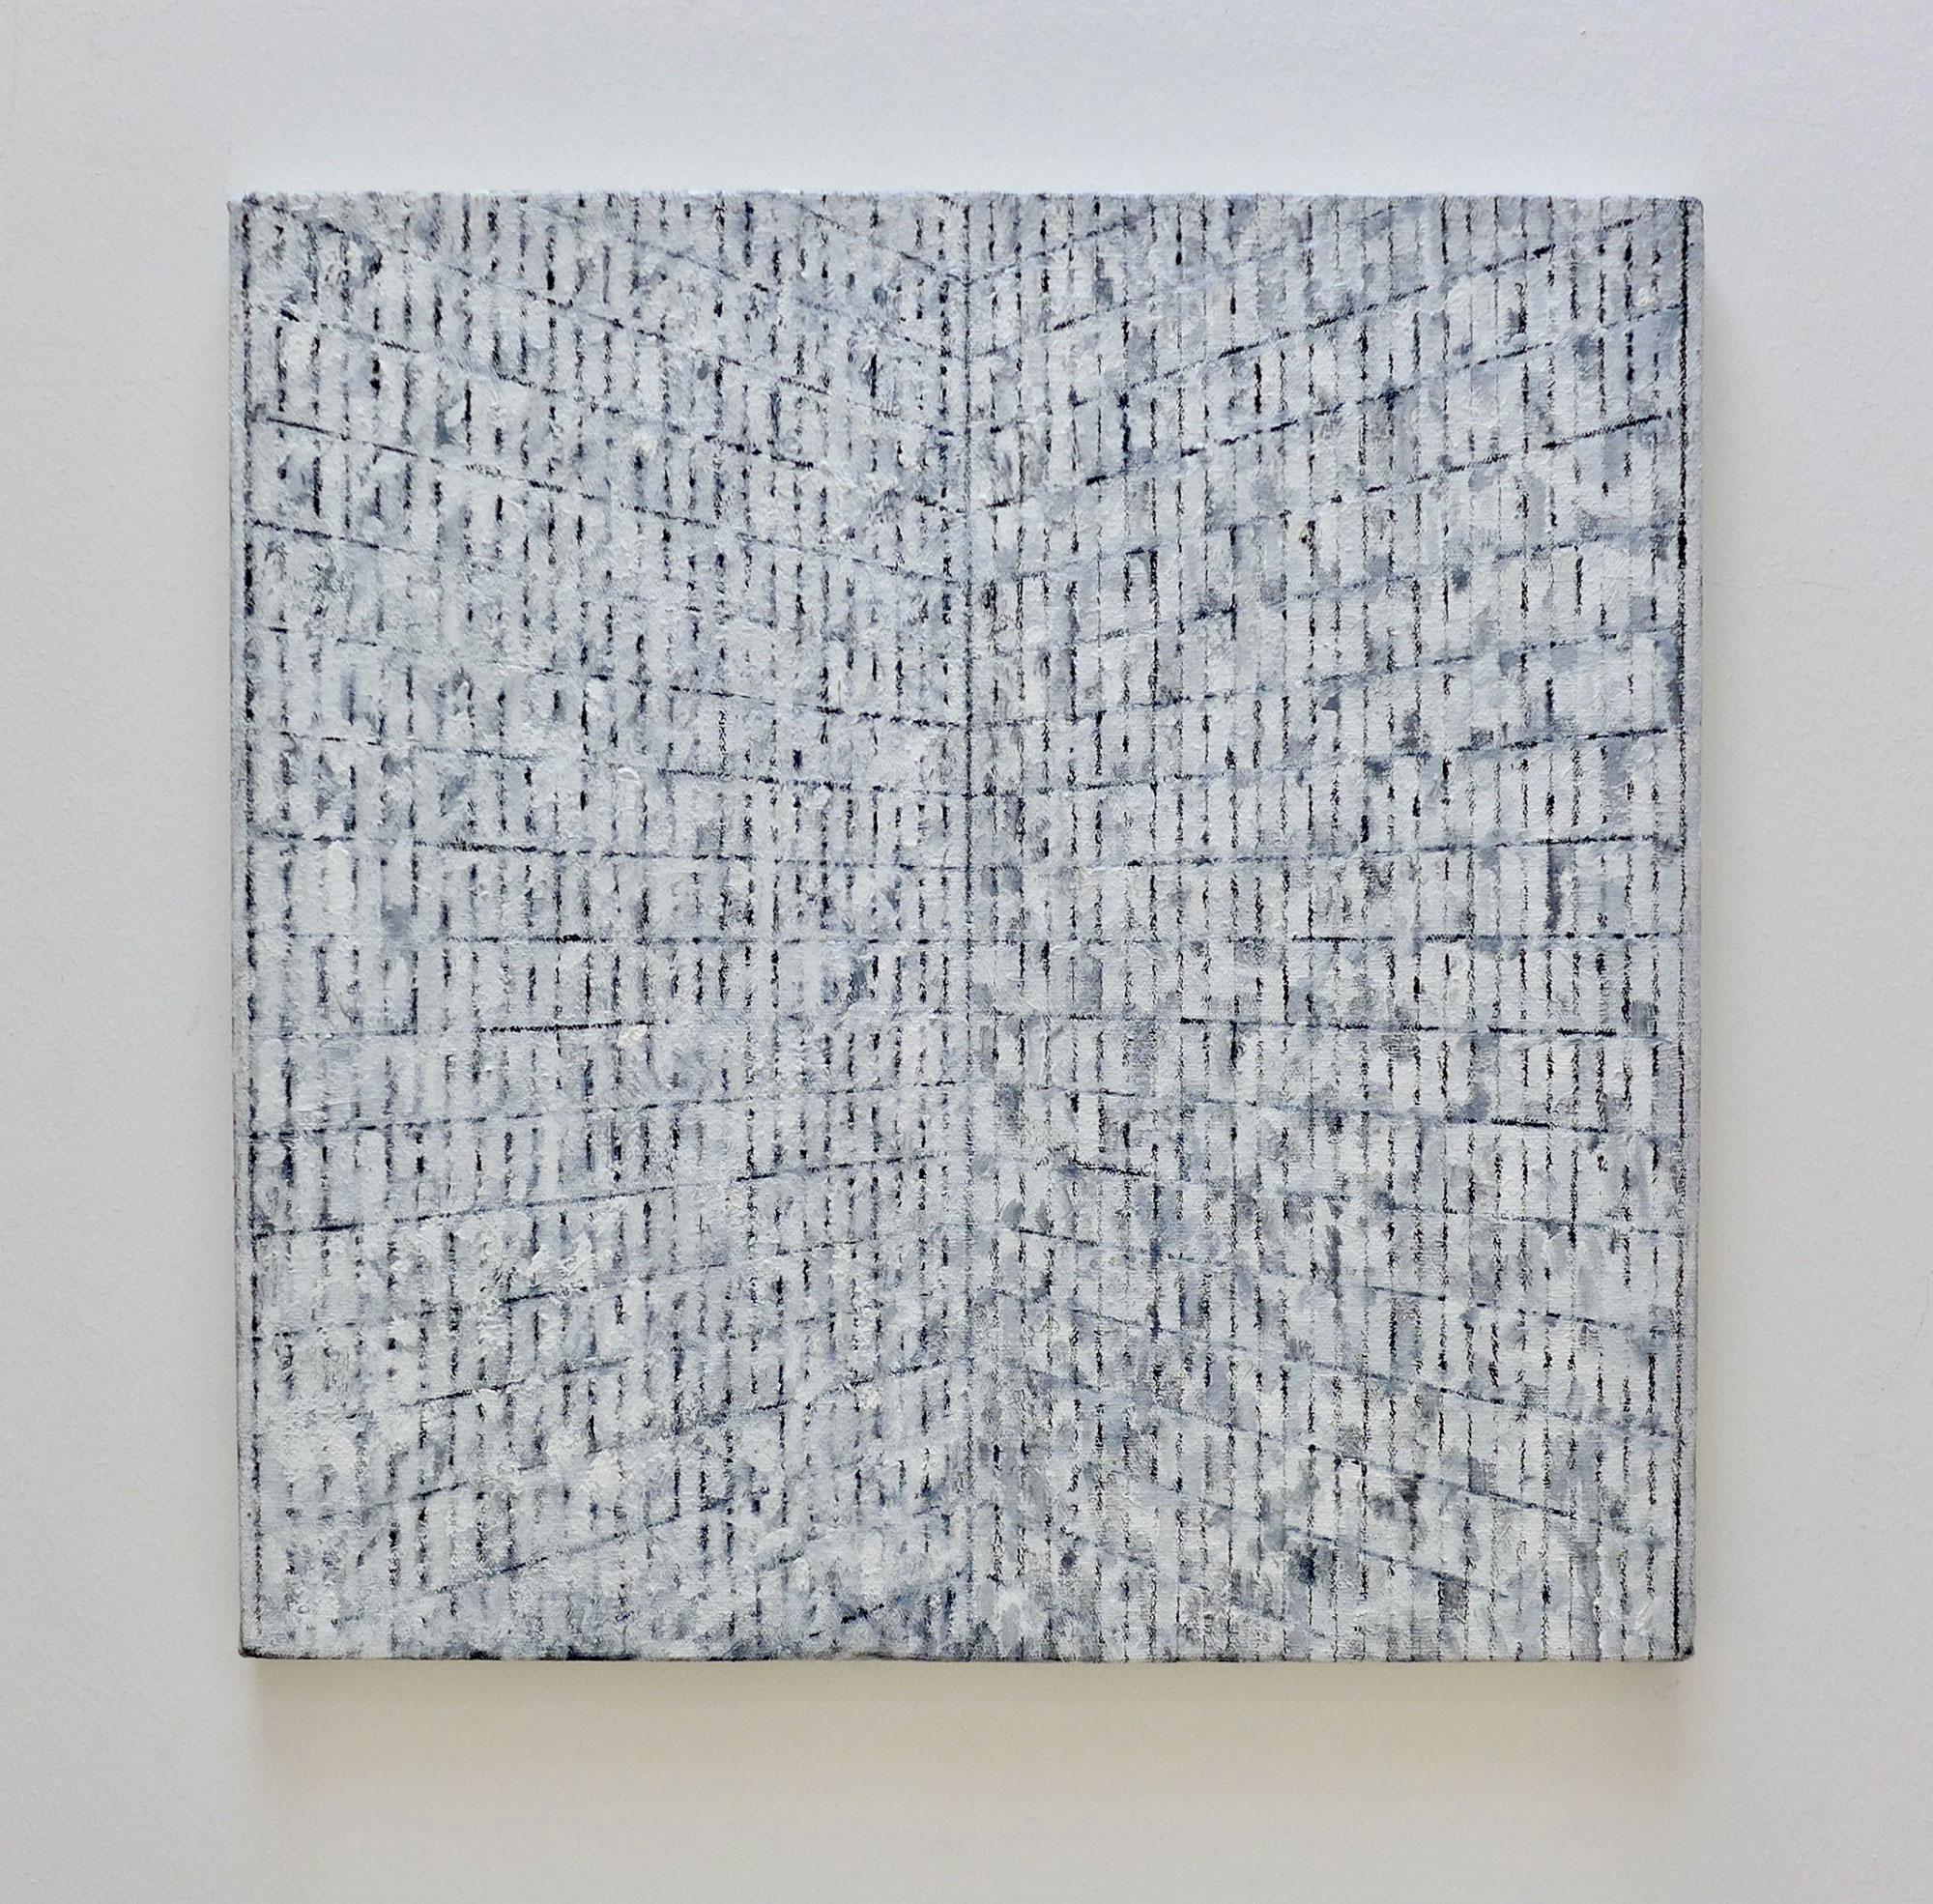 Kenneth Dingwall, Field of Balance, 2000, oil and graphite on canvas, 36cm x 36cm